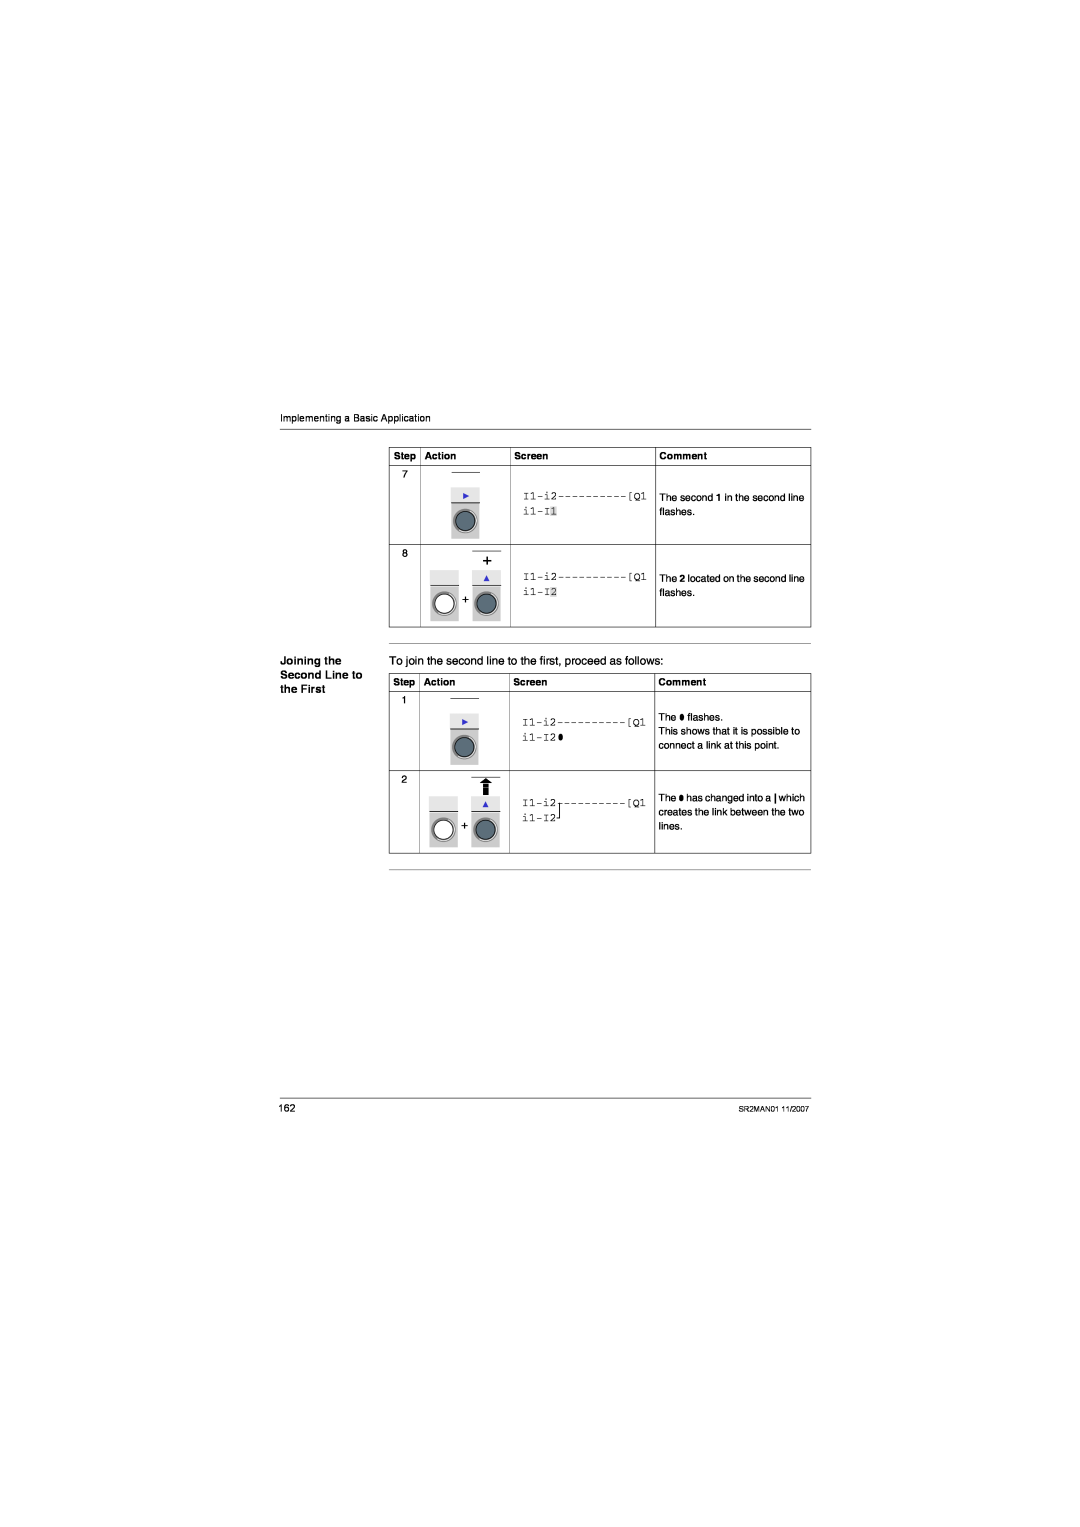 Schneider Electric SR2MAN01 Joining the Second Line to the First, I1-i2----------Q1, i1-I, Step Action, Screen, Comment 